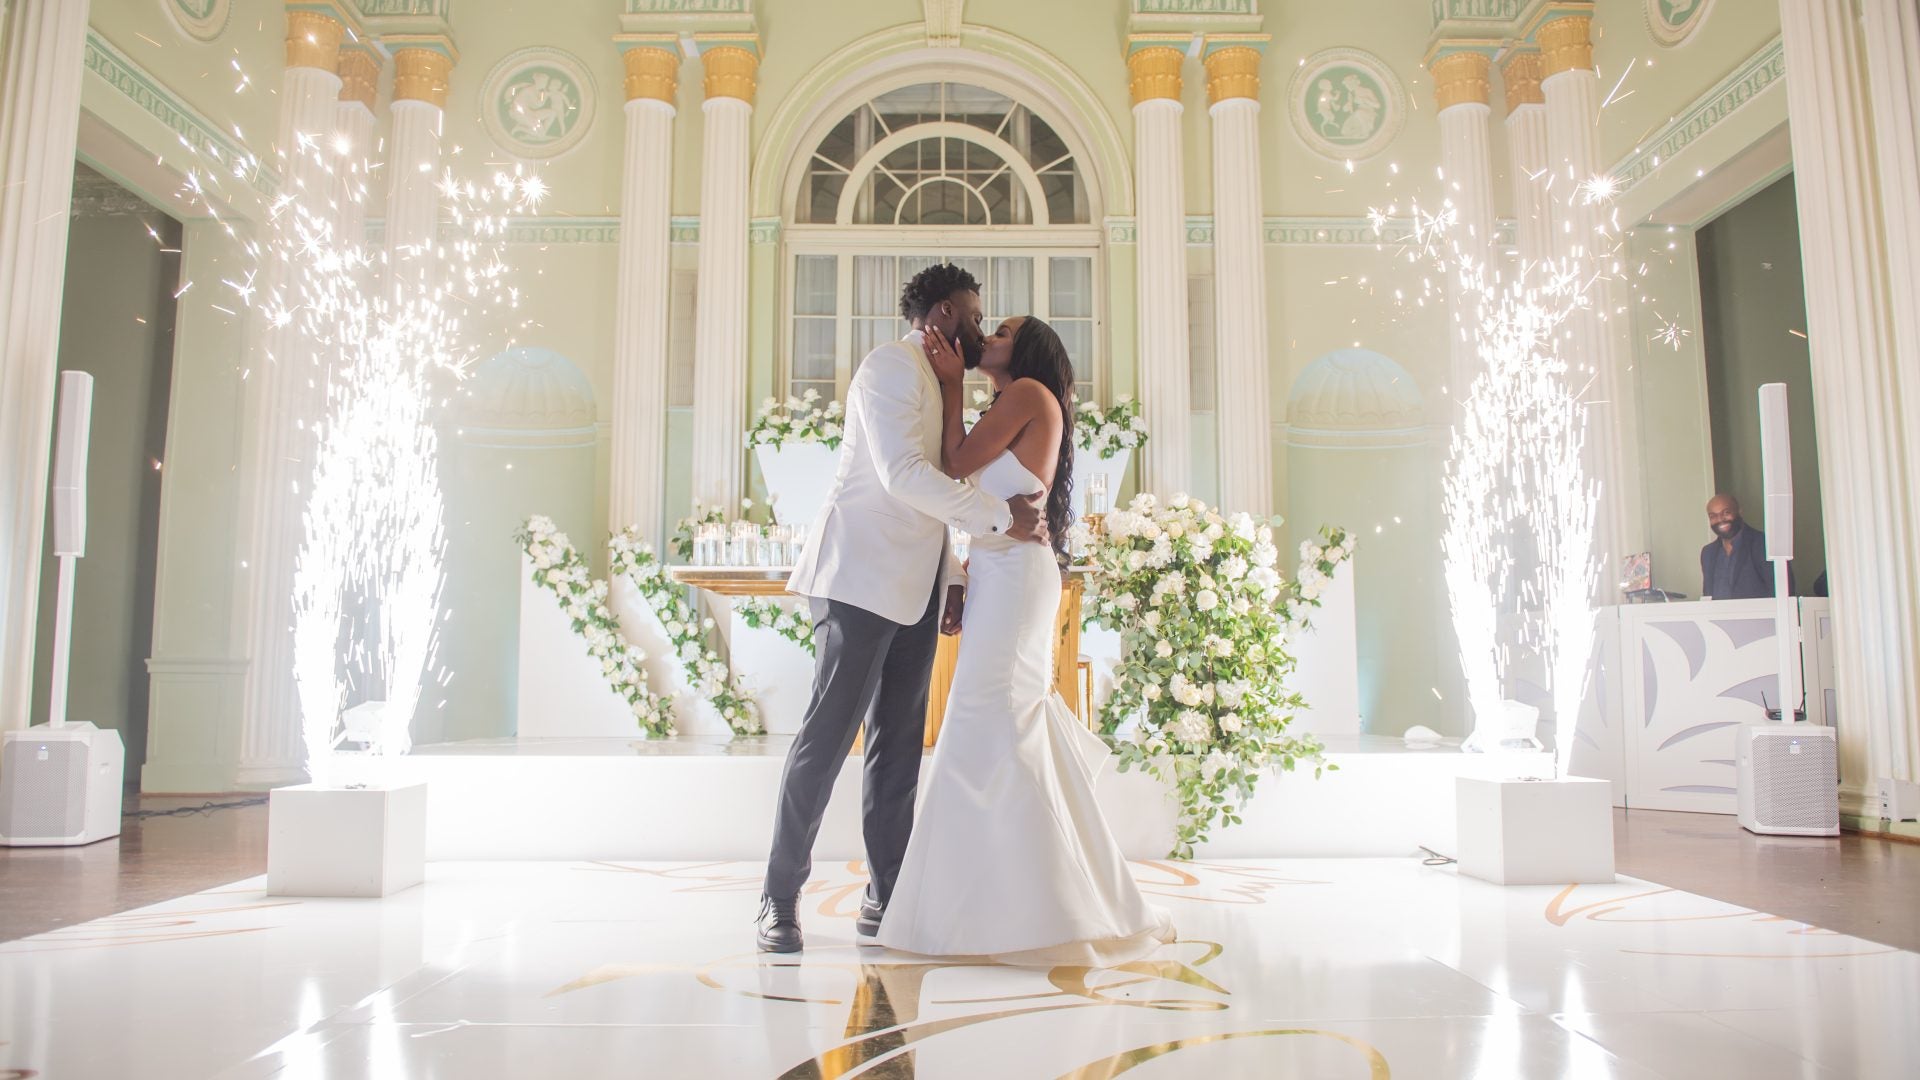 Bridal Bliss: Emani Hill And MLB Star Taylor Trammell Said "I Do" With Extravagant Florals And Fireworks